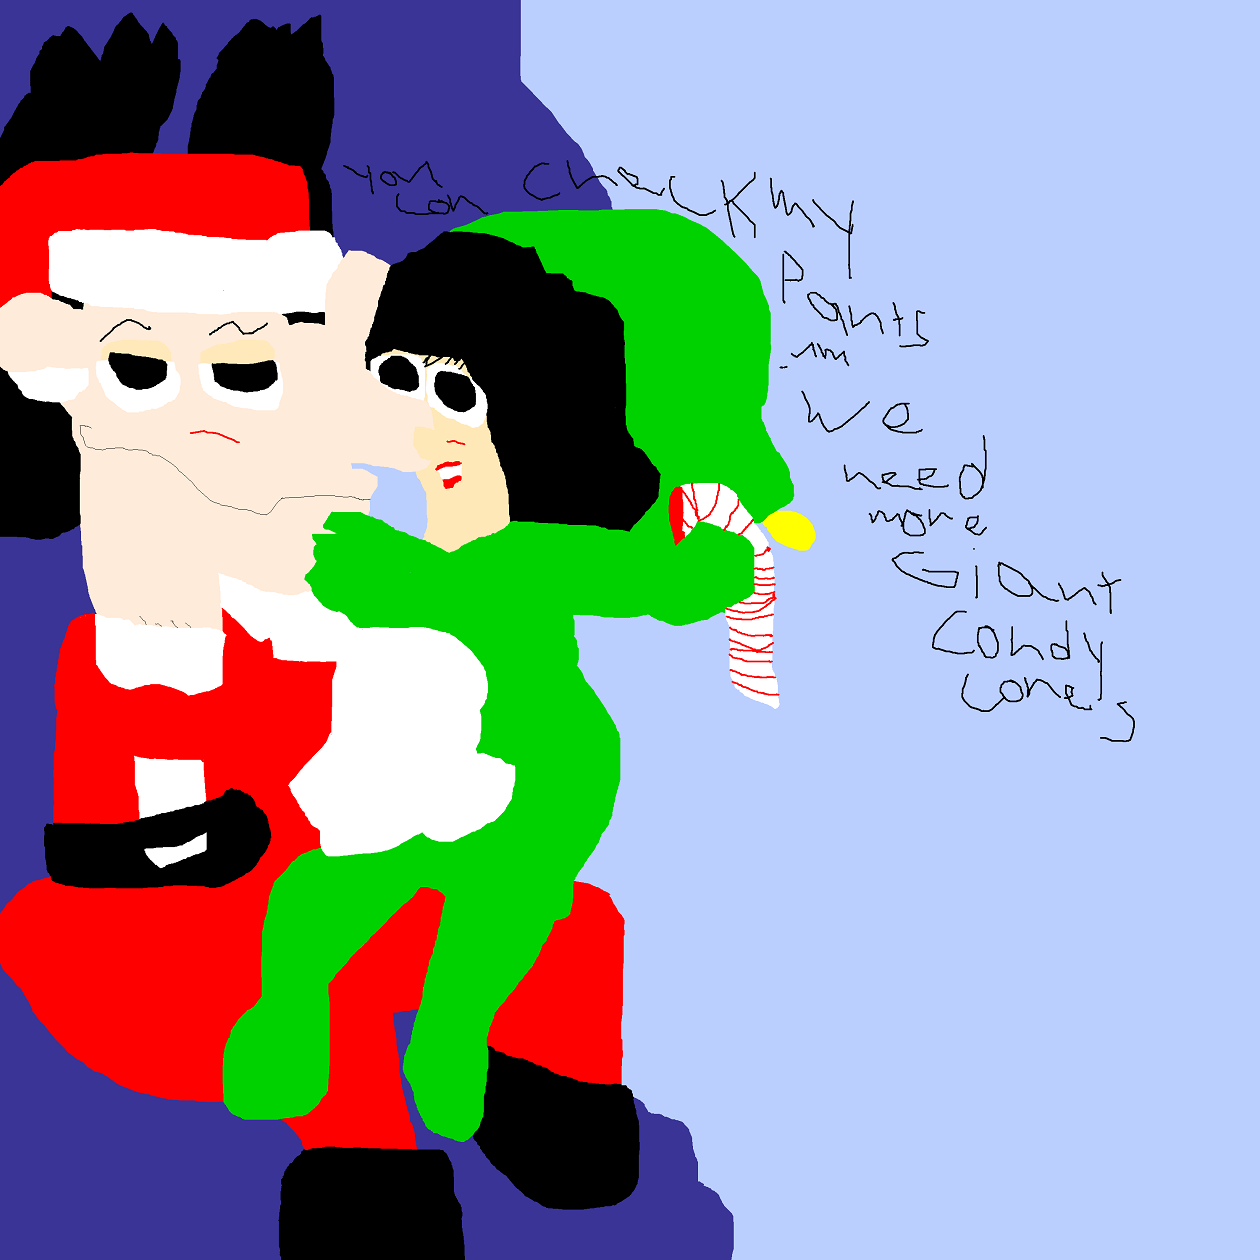 We Need More Giant Candy Canes Ms Paint by Falconlobo